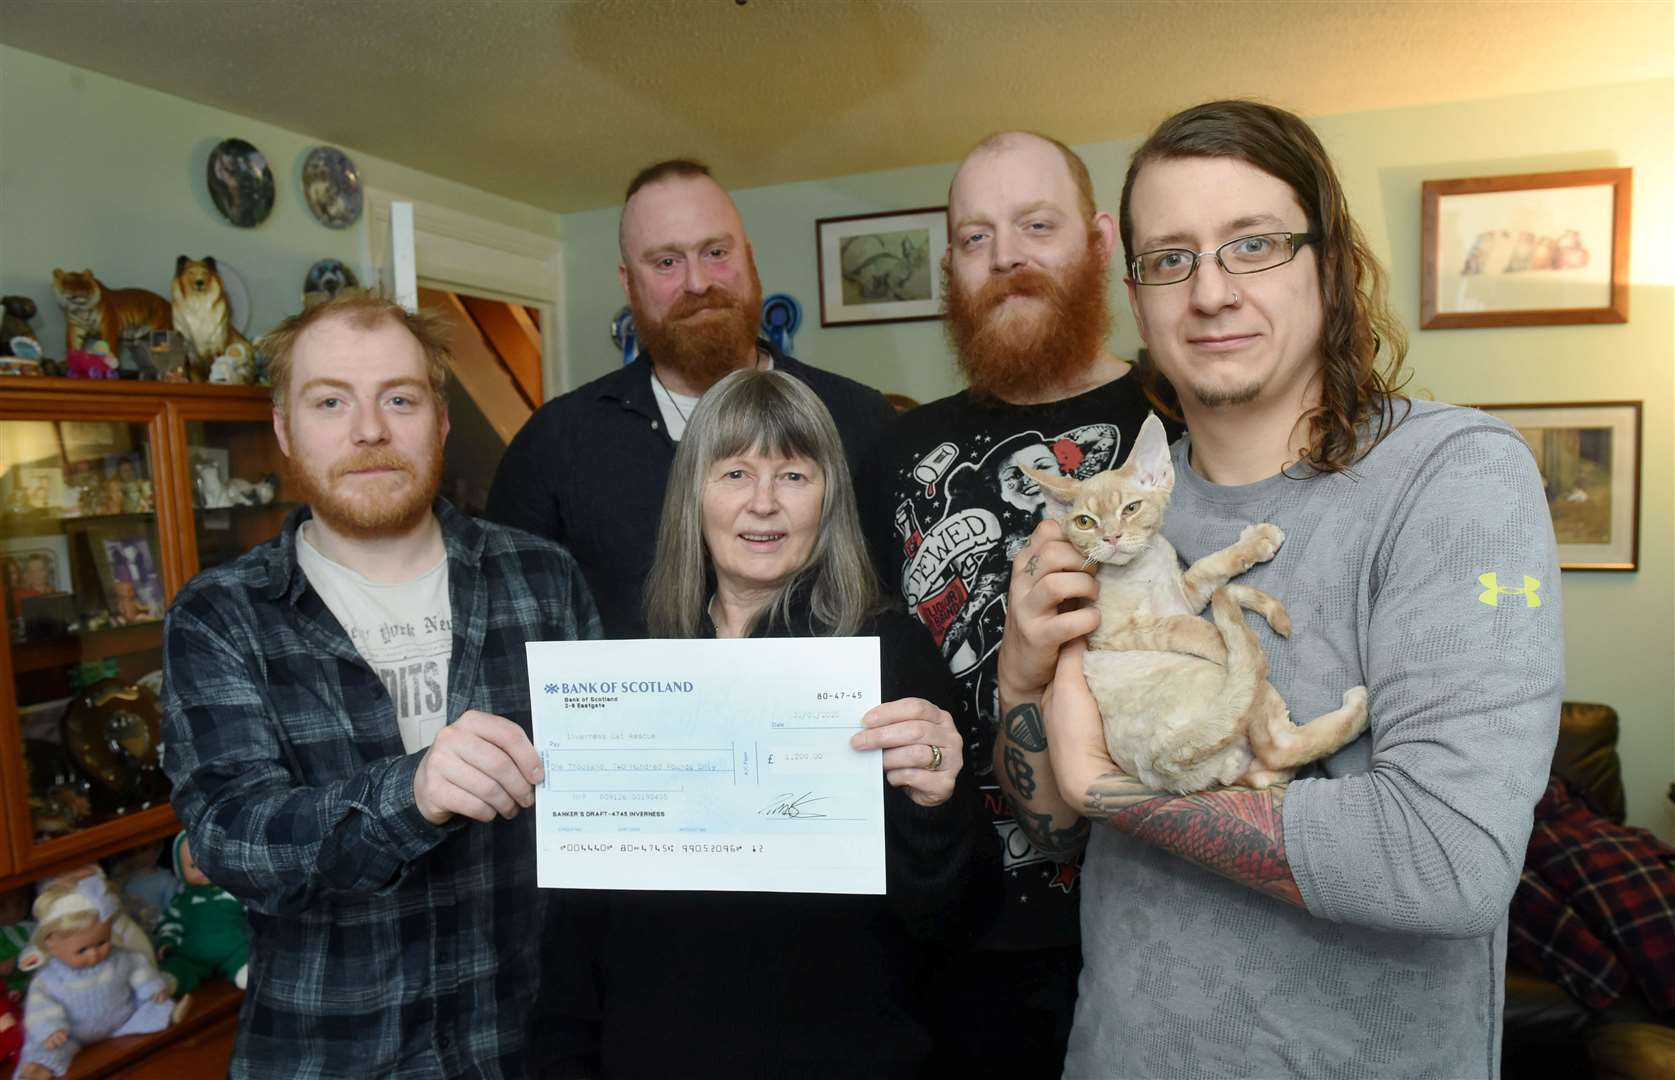 Rob Chalmers (right) raised almost £1200 in a 12 hour gaming session.